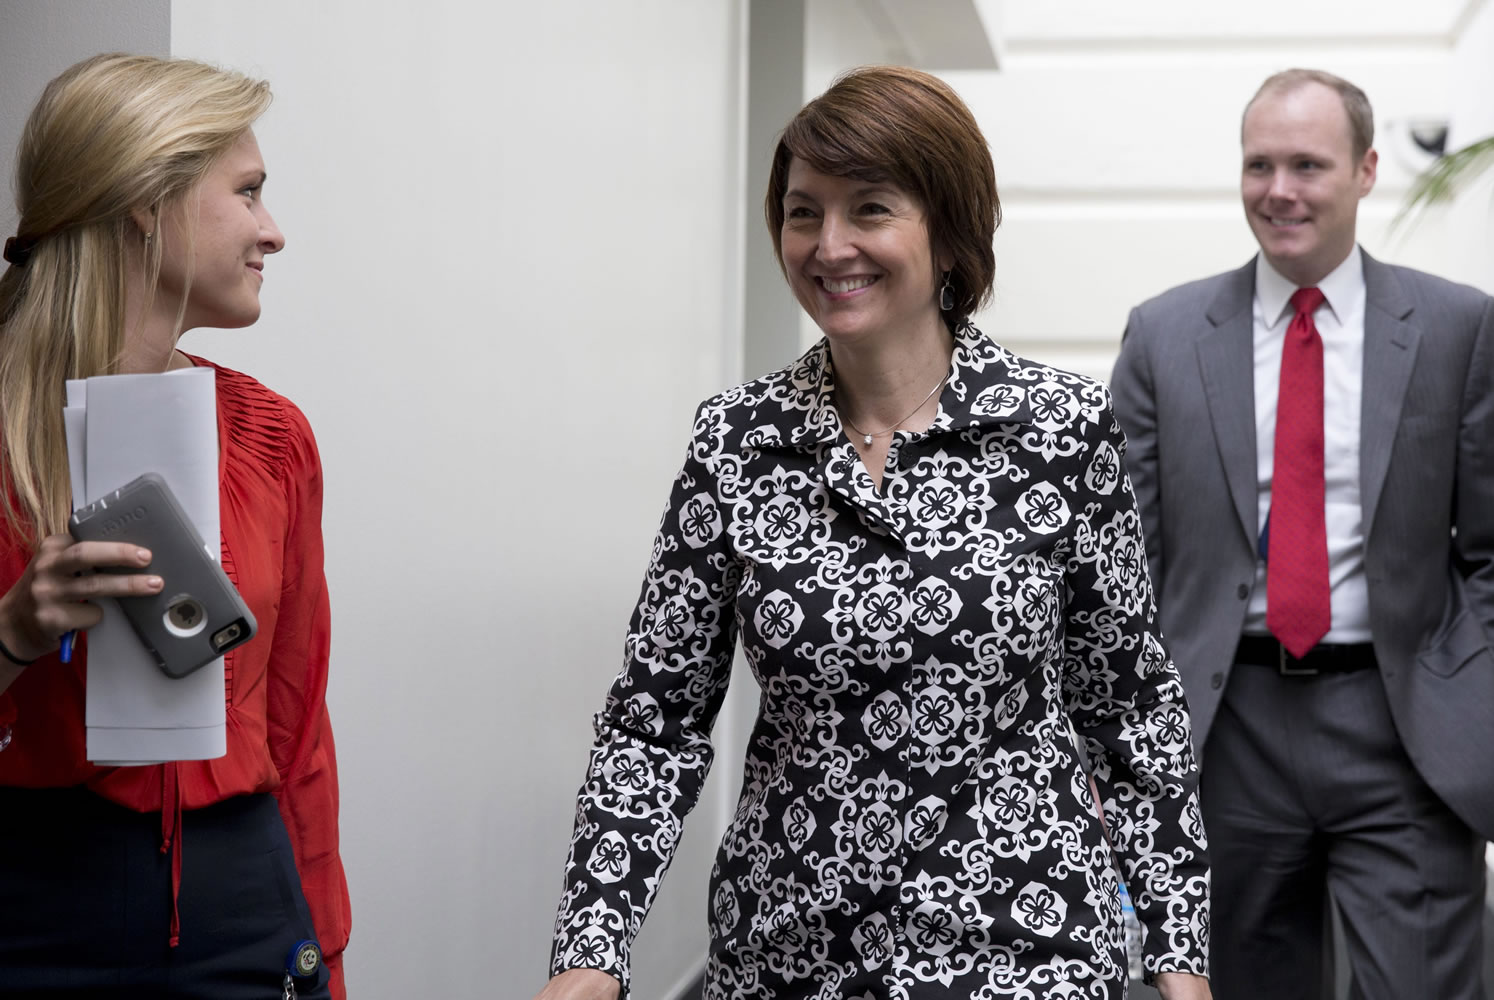 U.S. Rep. Cathy McMorris Rodgers, R-Wash., has decided not to run for House speaker.